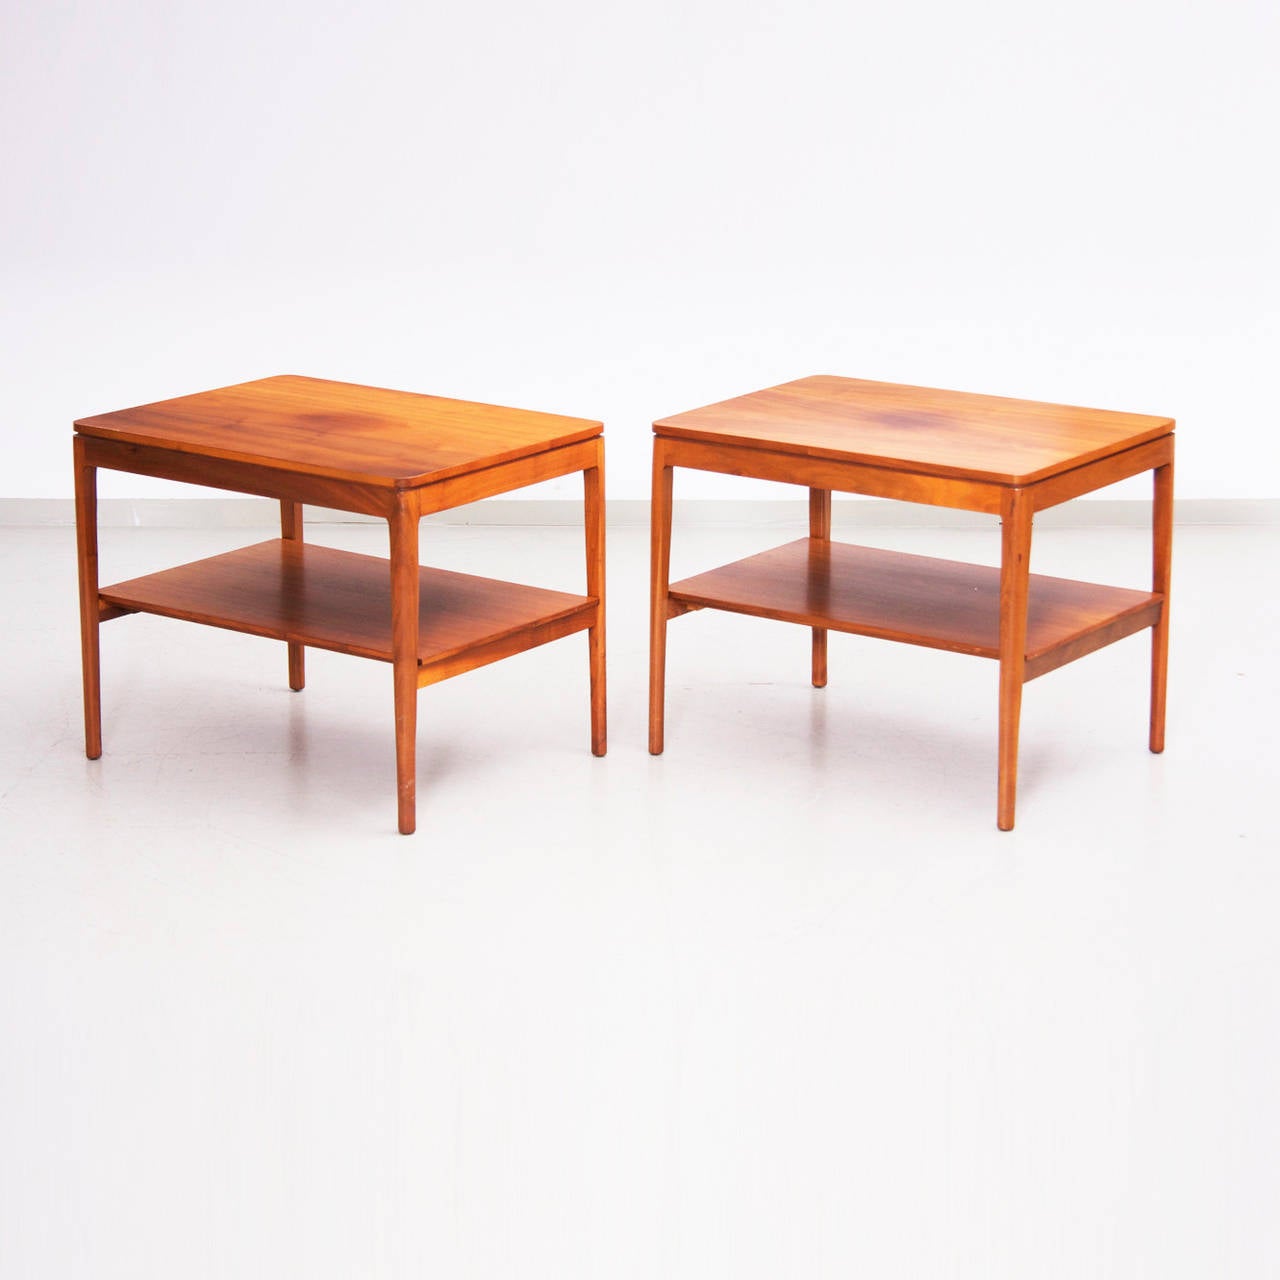 Pair of Kipp Stewart side/end tables or nightstands by Drexel. Great condition, with some darker fading on top where two lamps used to stand.